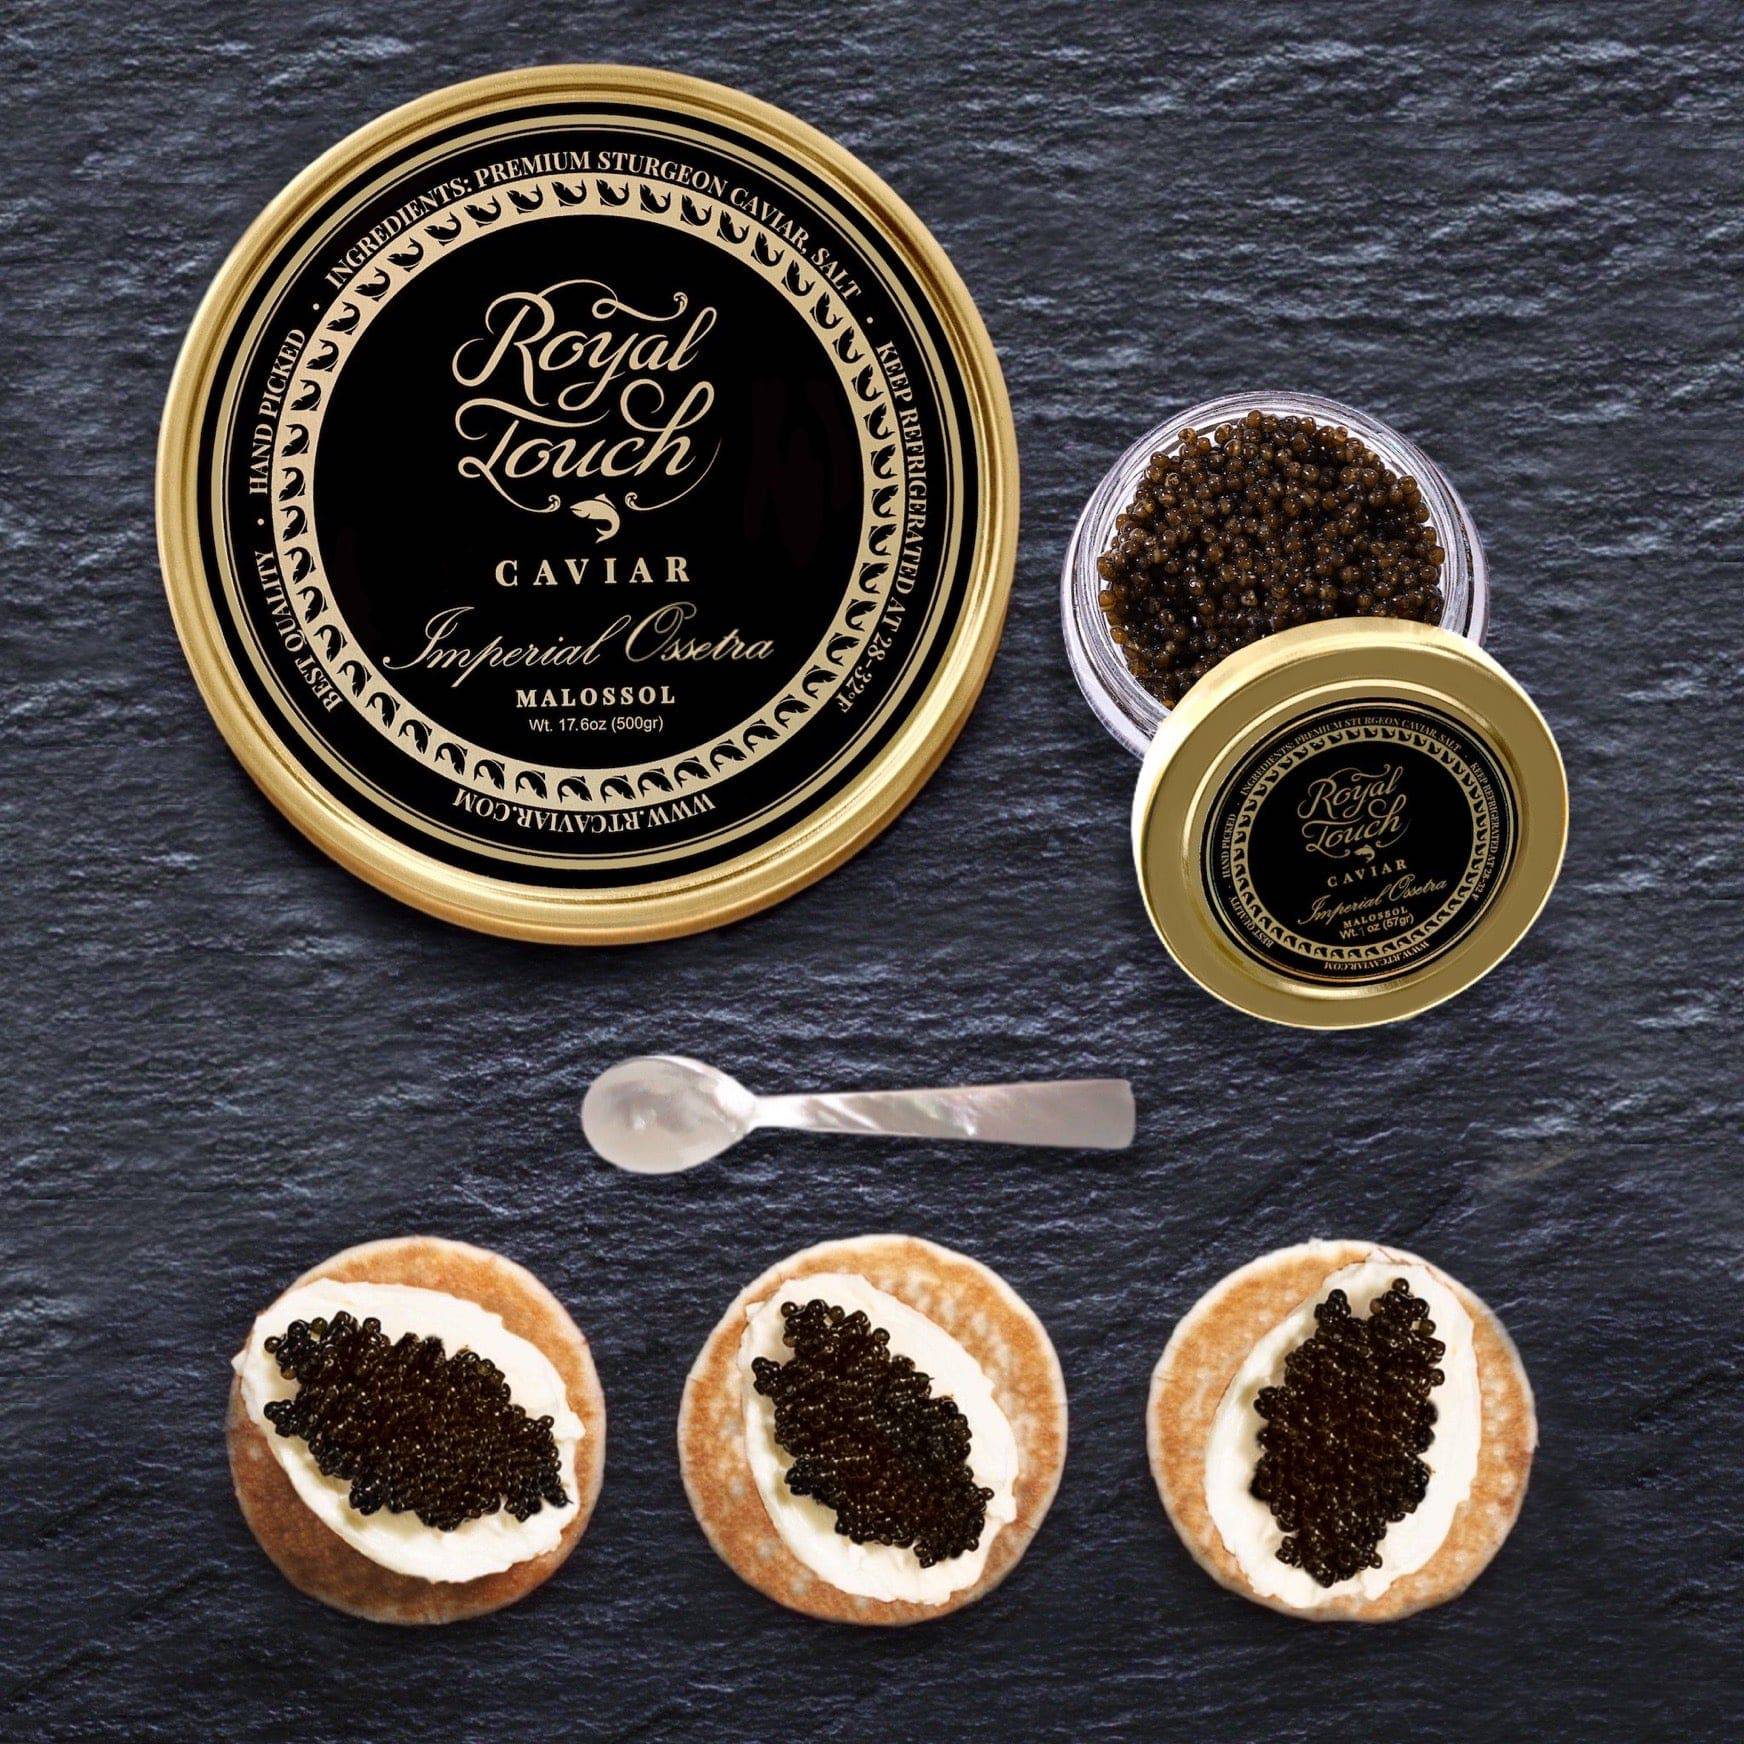 IMPERIAL OSETRA MALOSSOL CAVIAR GOLD TIN SEALED 17.6 OZ 500 GM + FRENCH BLINIS + MOTHER OF PEARL SPOON + 1 OZ JAR OF CAVIAR FREE